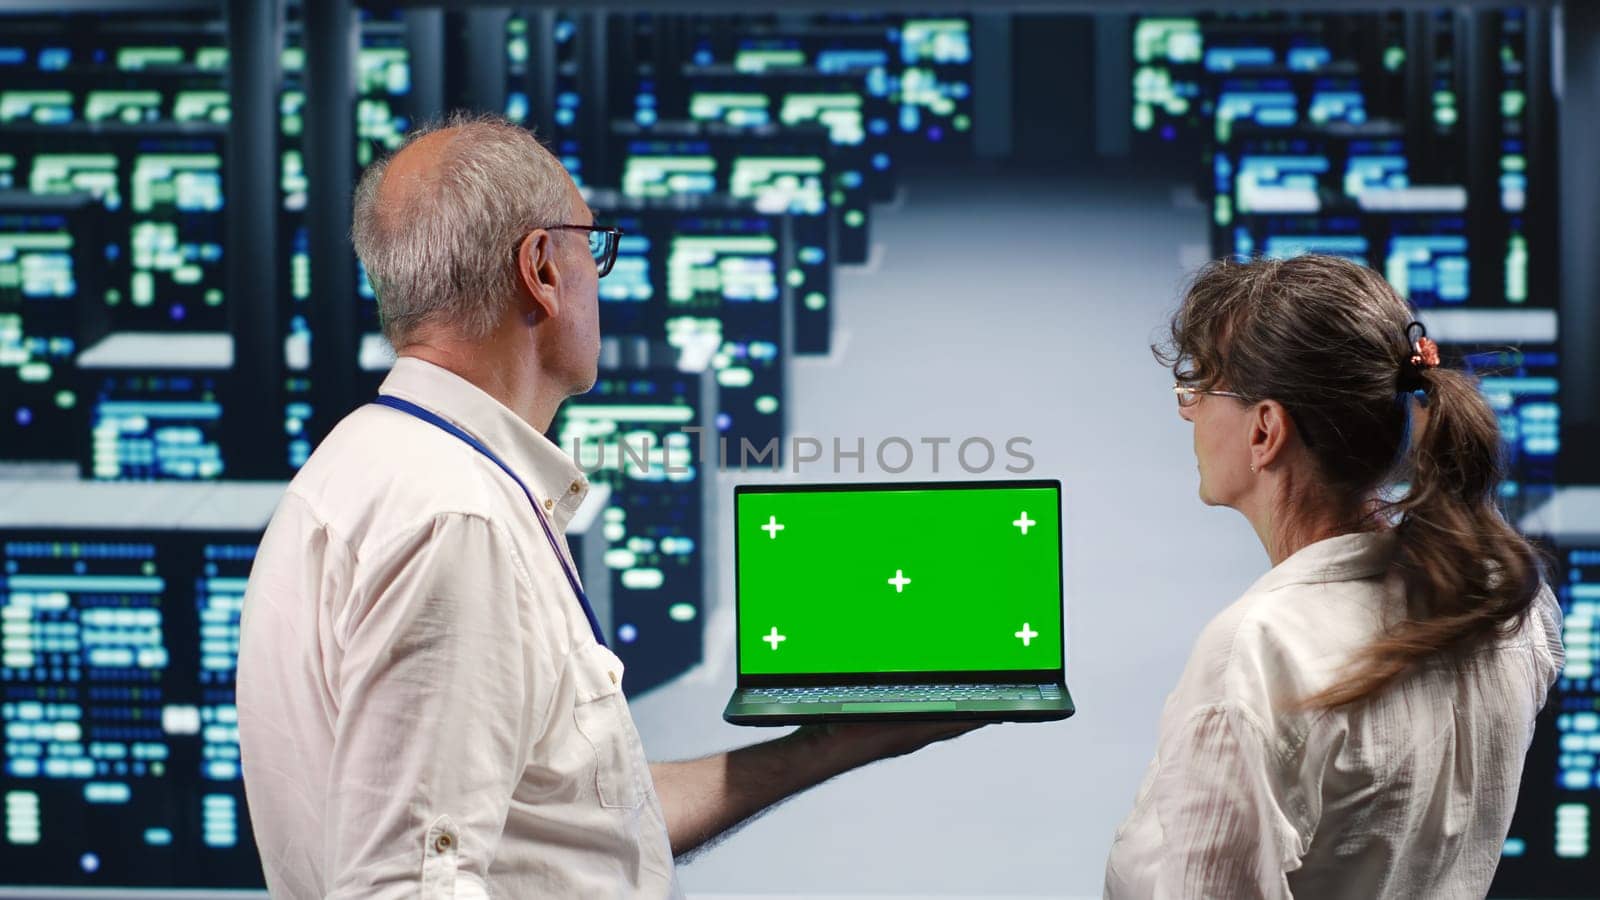 Experienced professionals looking around high tech data center, using mockup laptop to crosscheck disaster recovery plan and assess server infrastructure in need of replacement, preventing issues